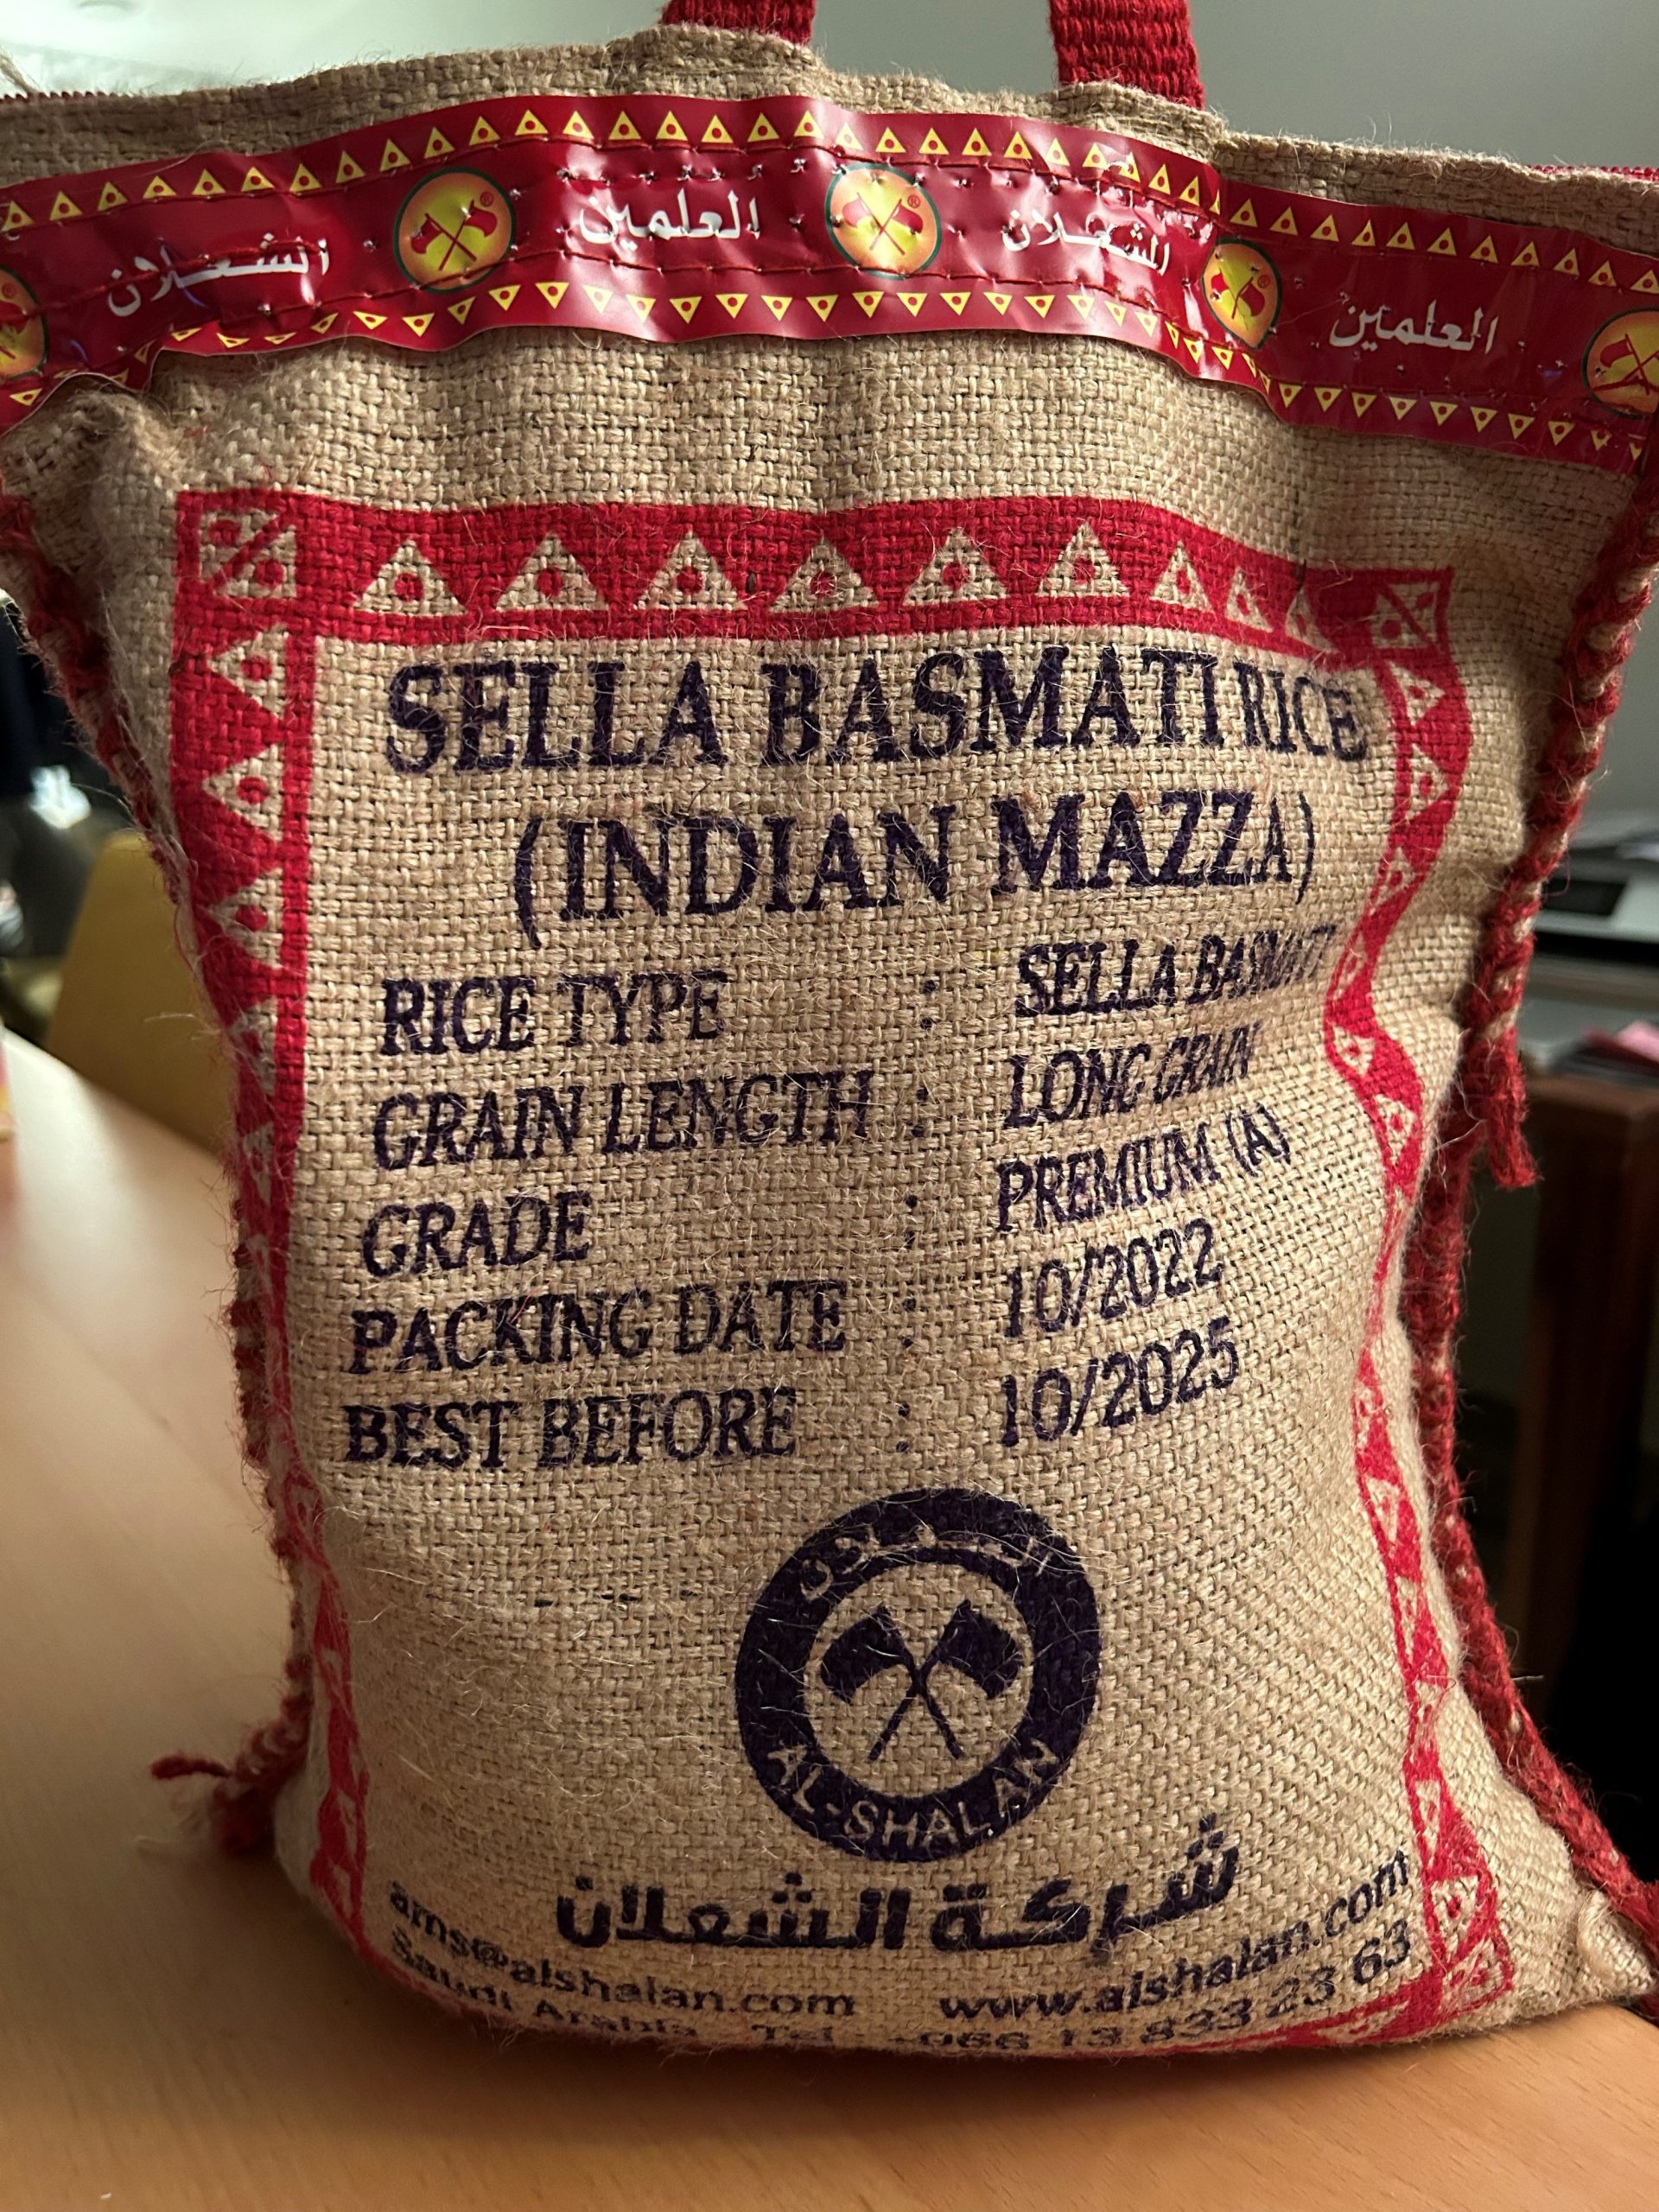 A burlap sack with a red and black text